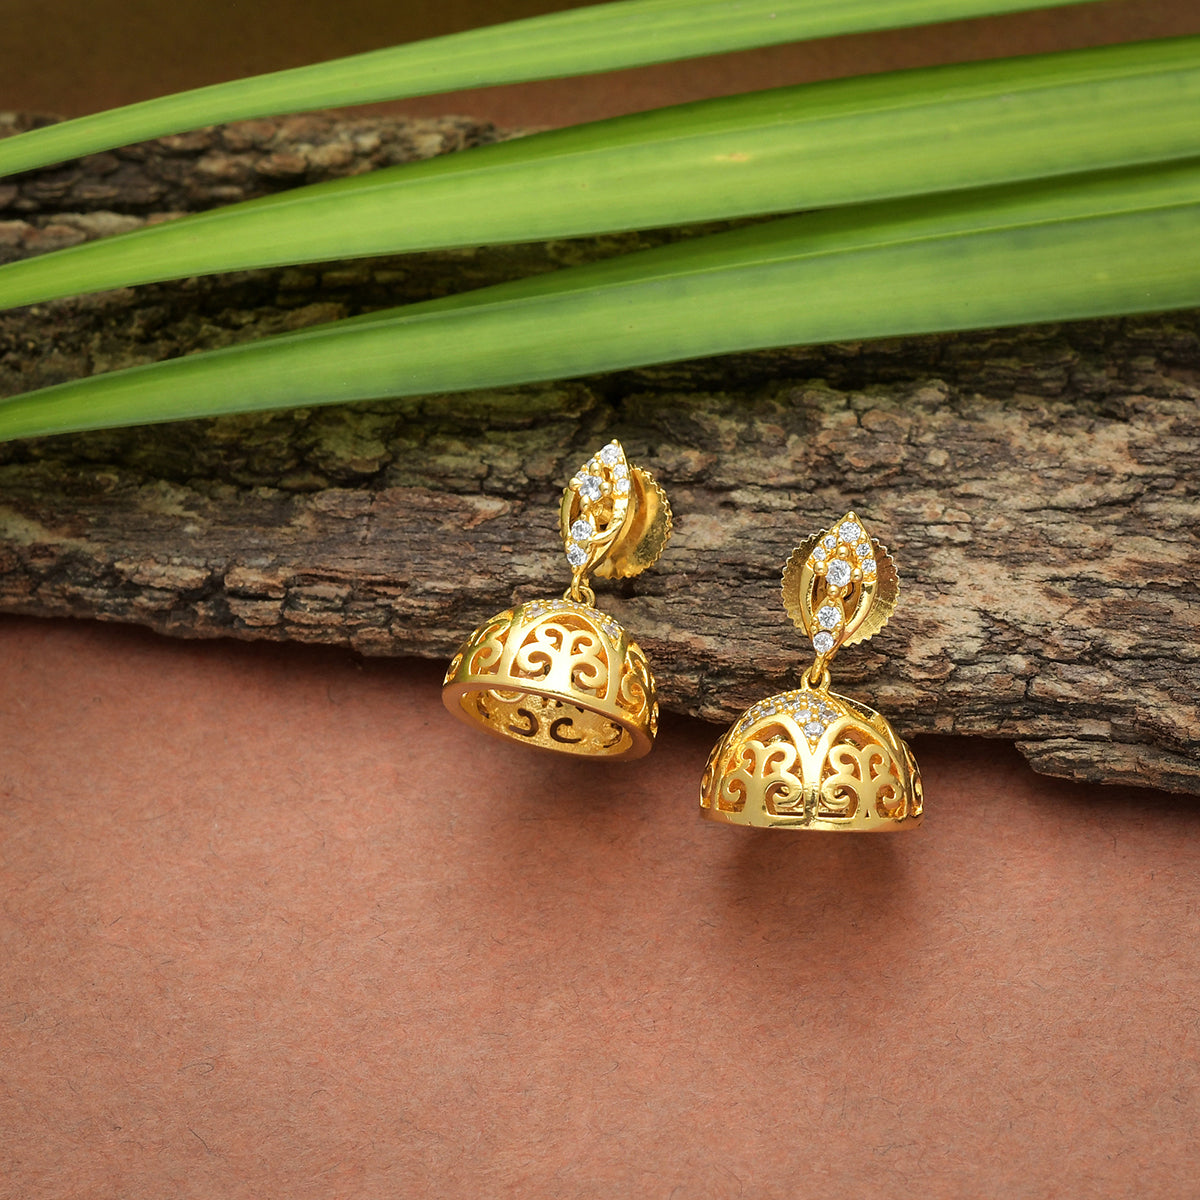 CZ Traditional Gold Plated White Jhumka Earrings